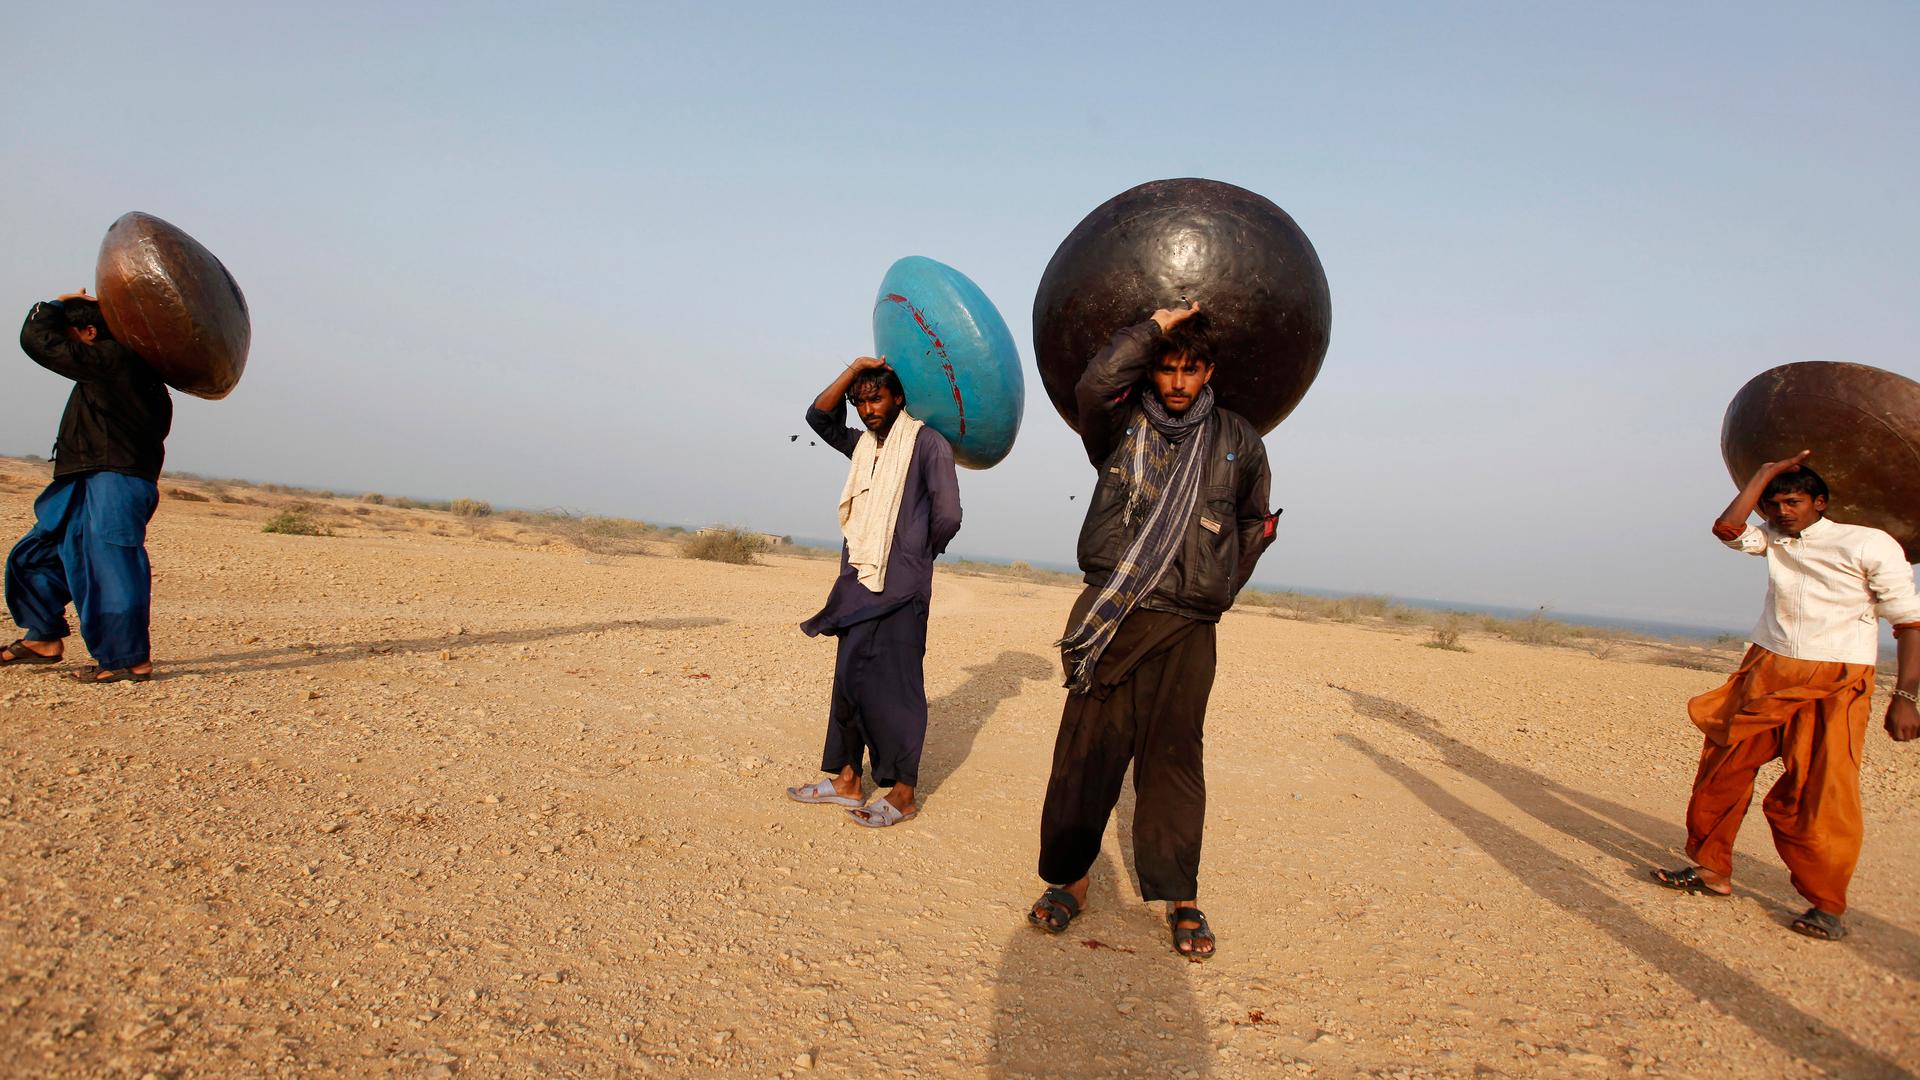 Men carry floating pitchers which they use to catch fish while heading home in Soneri village next to Keenjhar Lake, near Thatta, Pakistan.